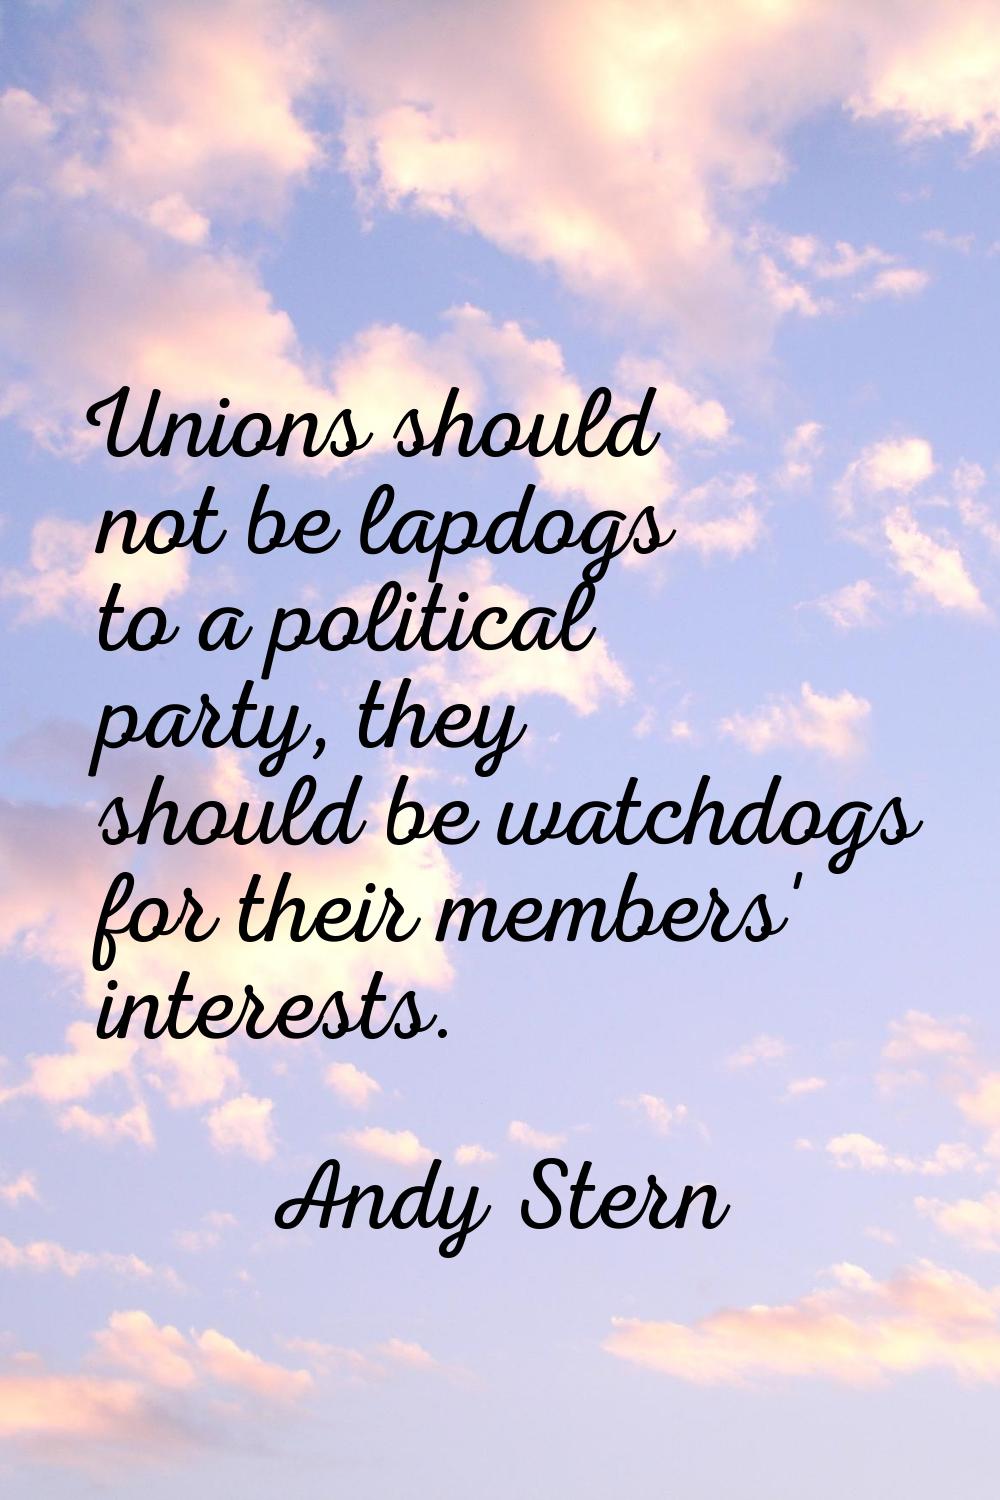 Unions should not be lapdogs to a political party, they should be watchdogs for their members' inte